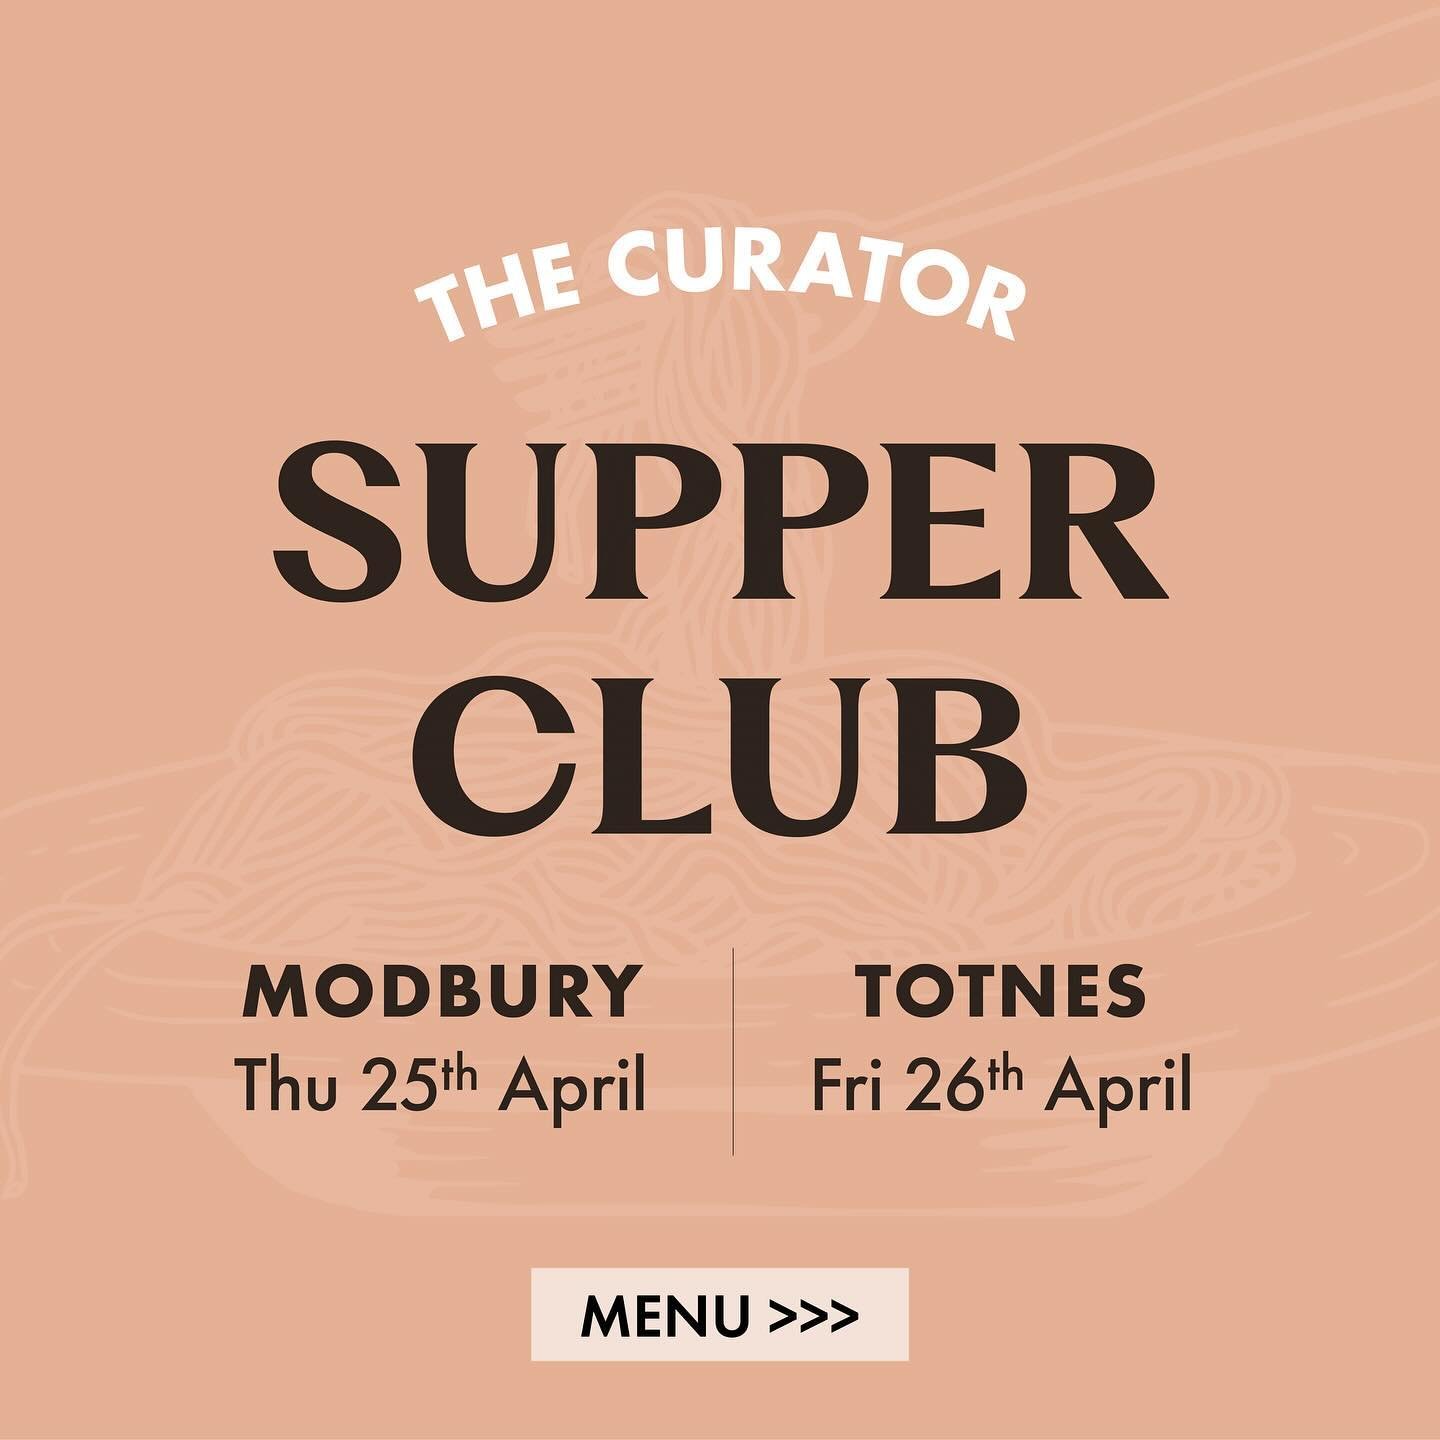 April&rsquo;s Supper Club

Have a look at the delicious menu for this month&rsquo;s Supper Club! You can find the link in our bio to book your tickets on our website.

As always, you can expect an intimate evening of classic Italian food made using t